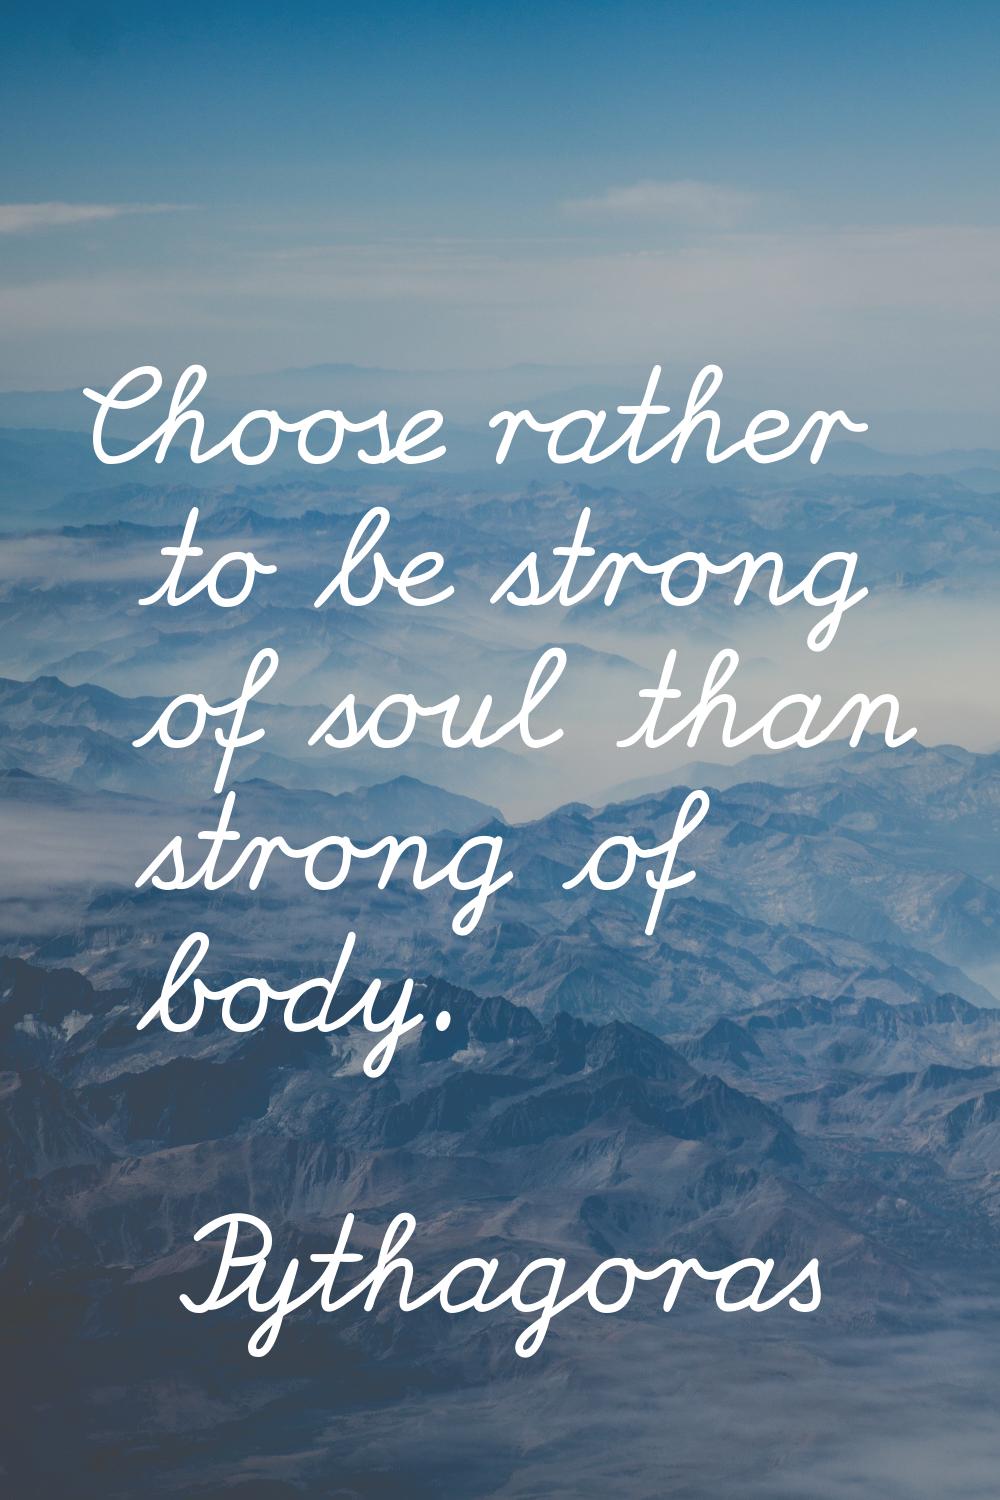 Choose rather to be strong of soul than strong of body.